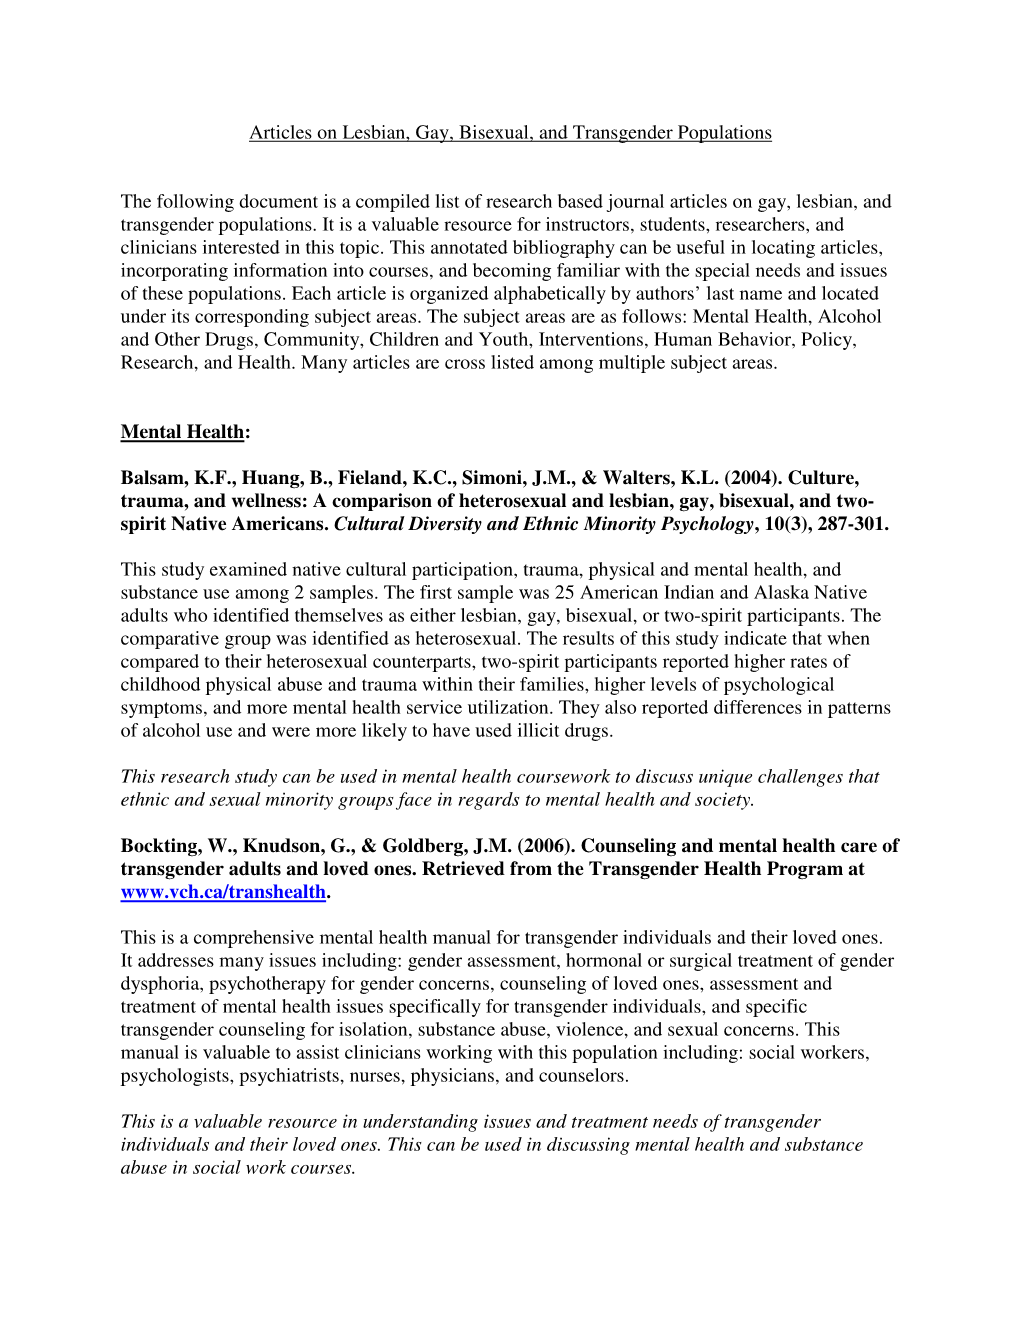 Articles on Lesbian, Gay, Bisexual, and Transgender Populations The